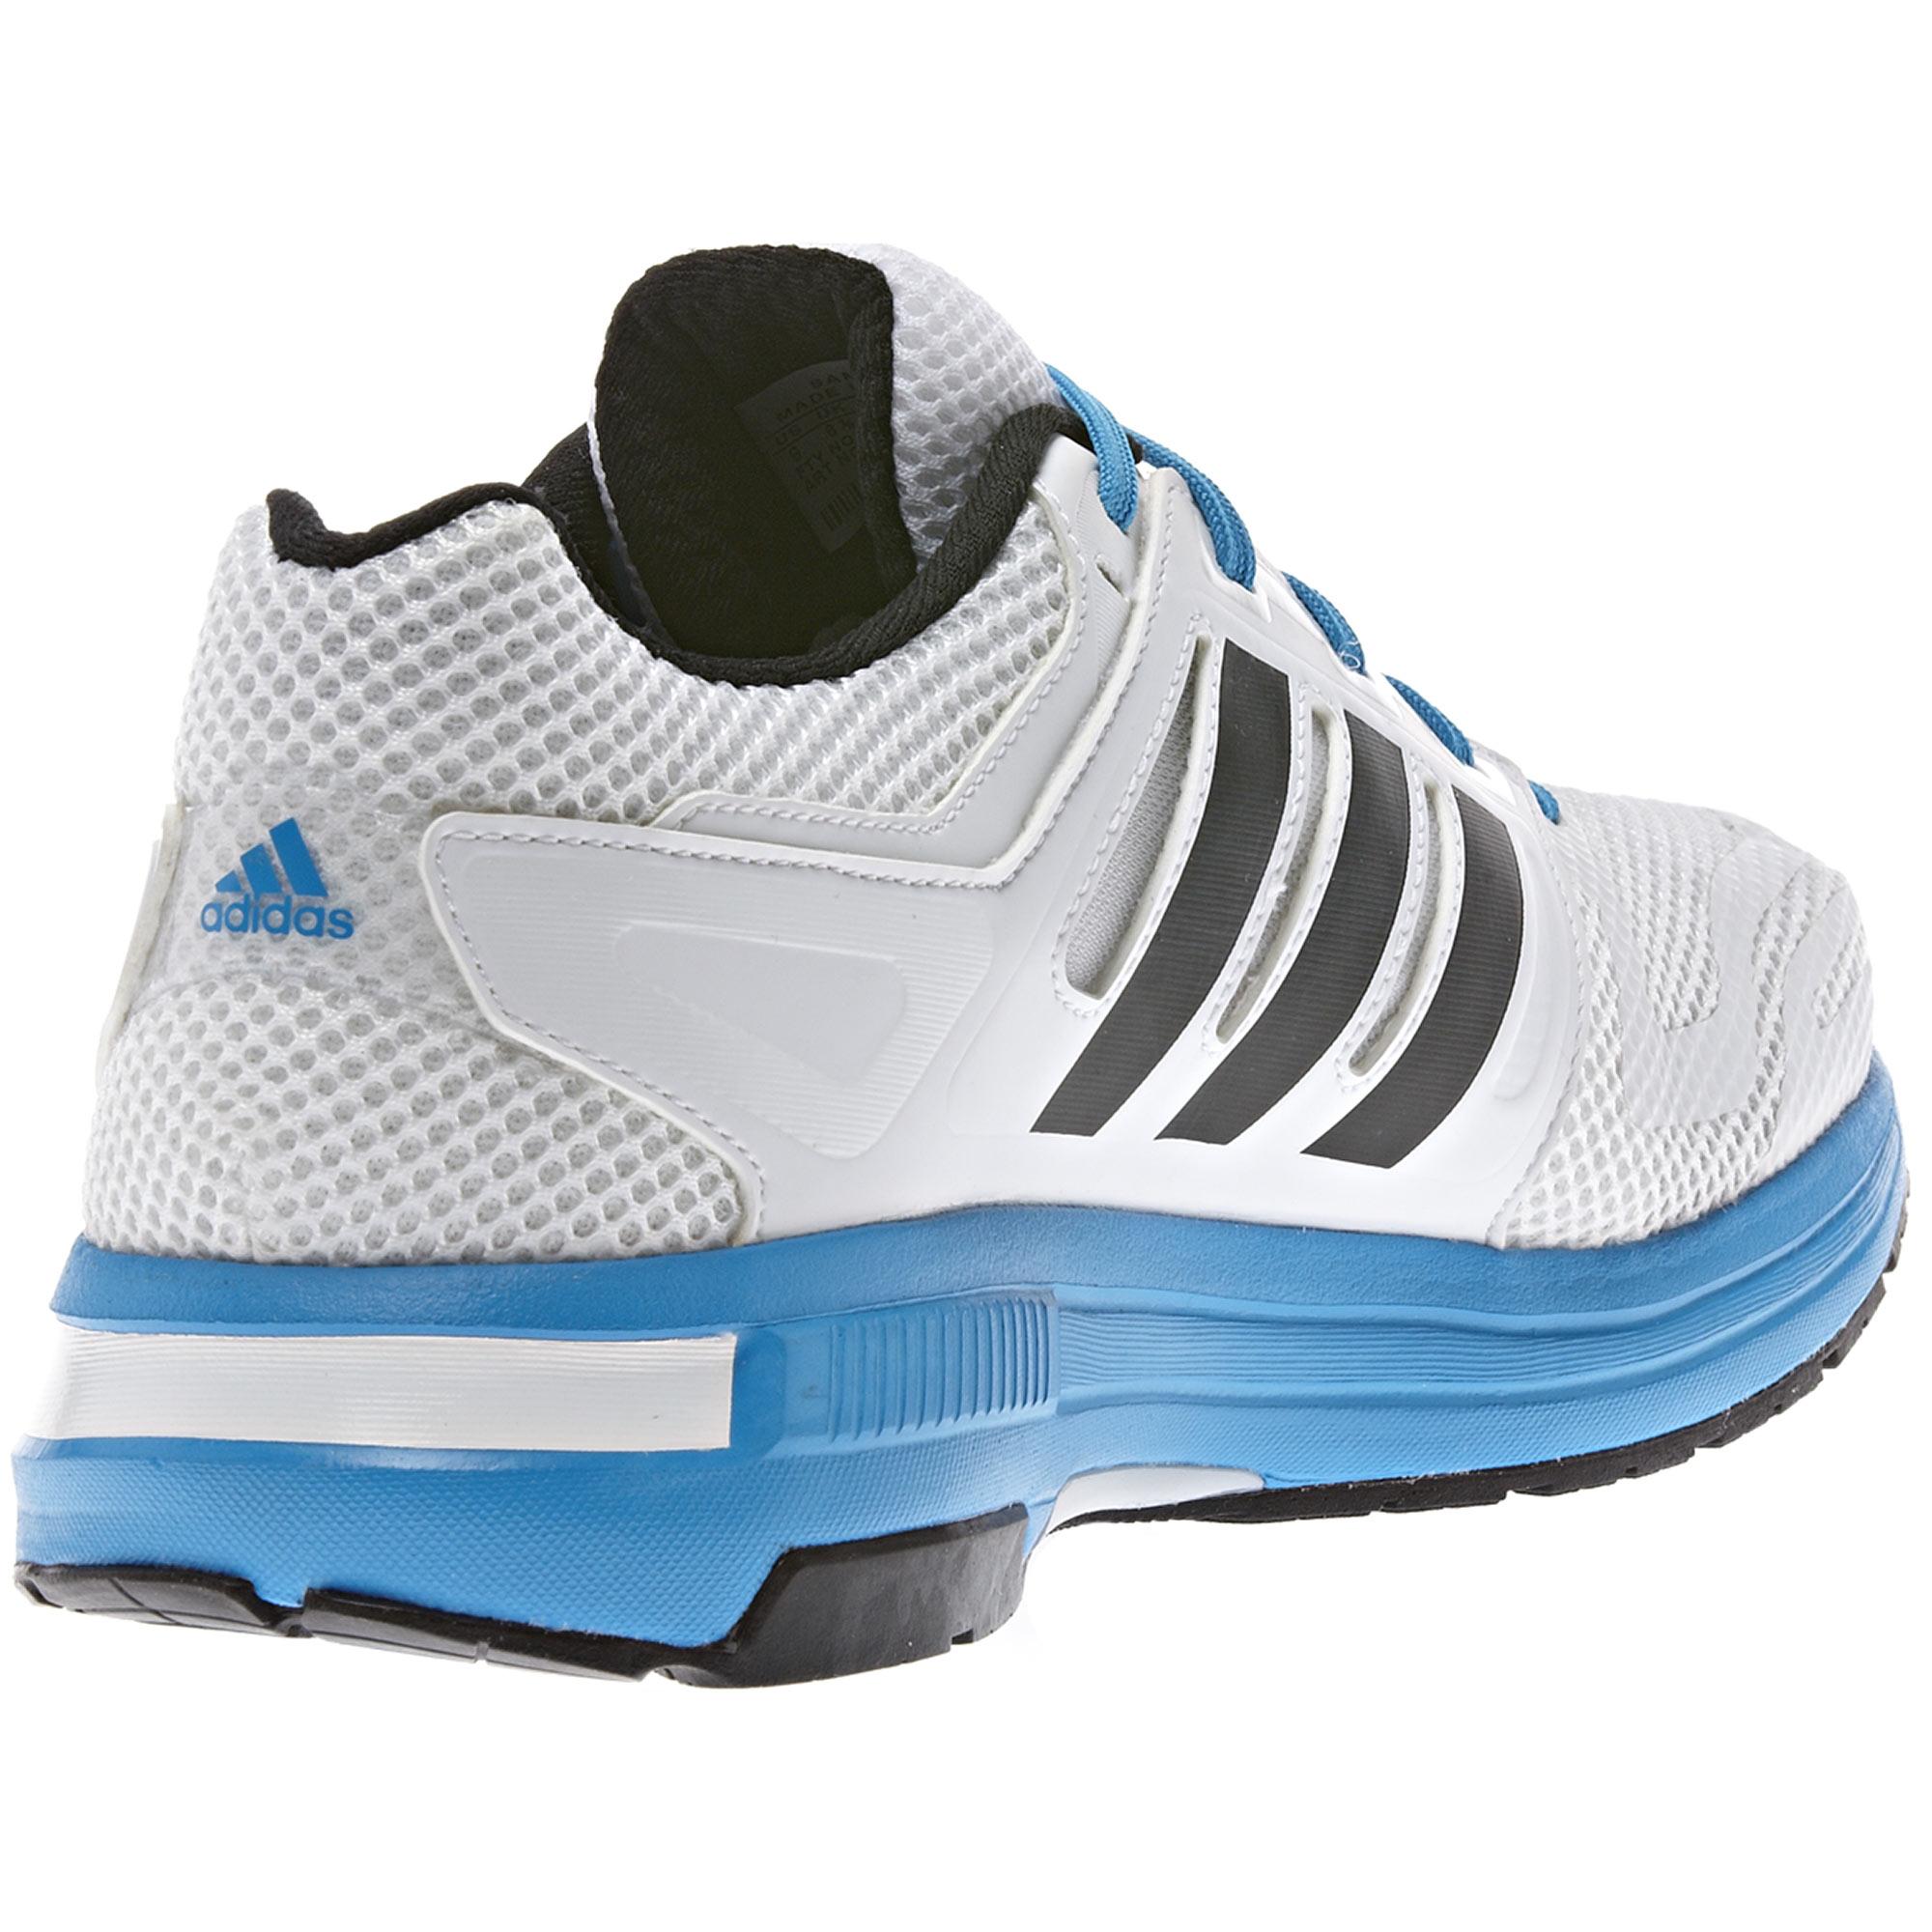 adidas shoes for men